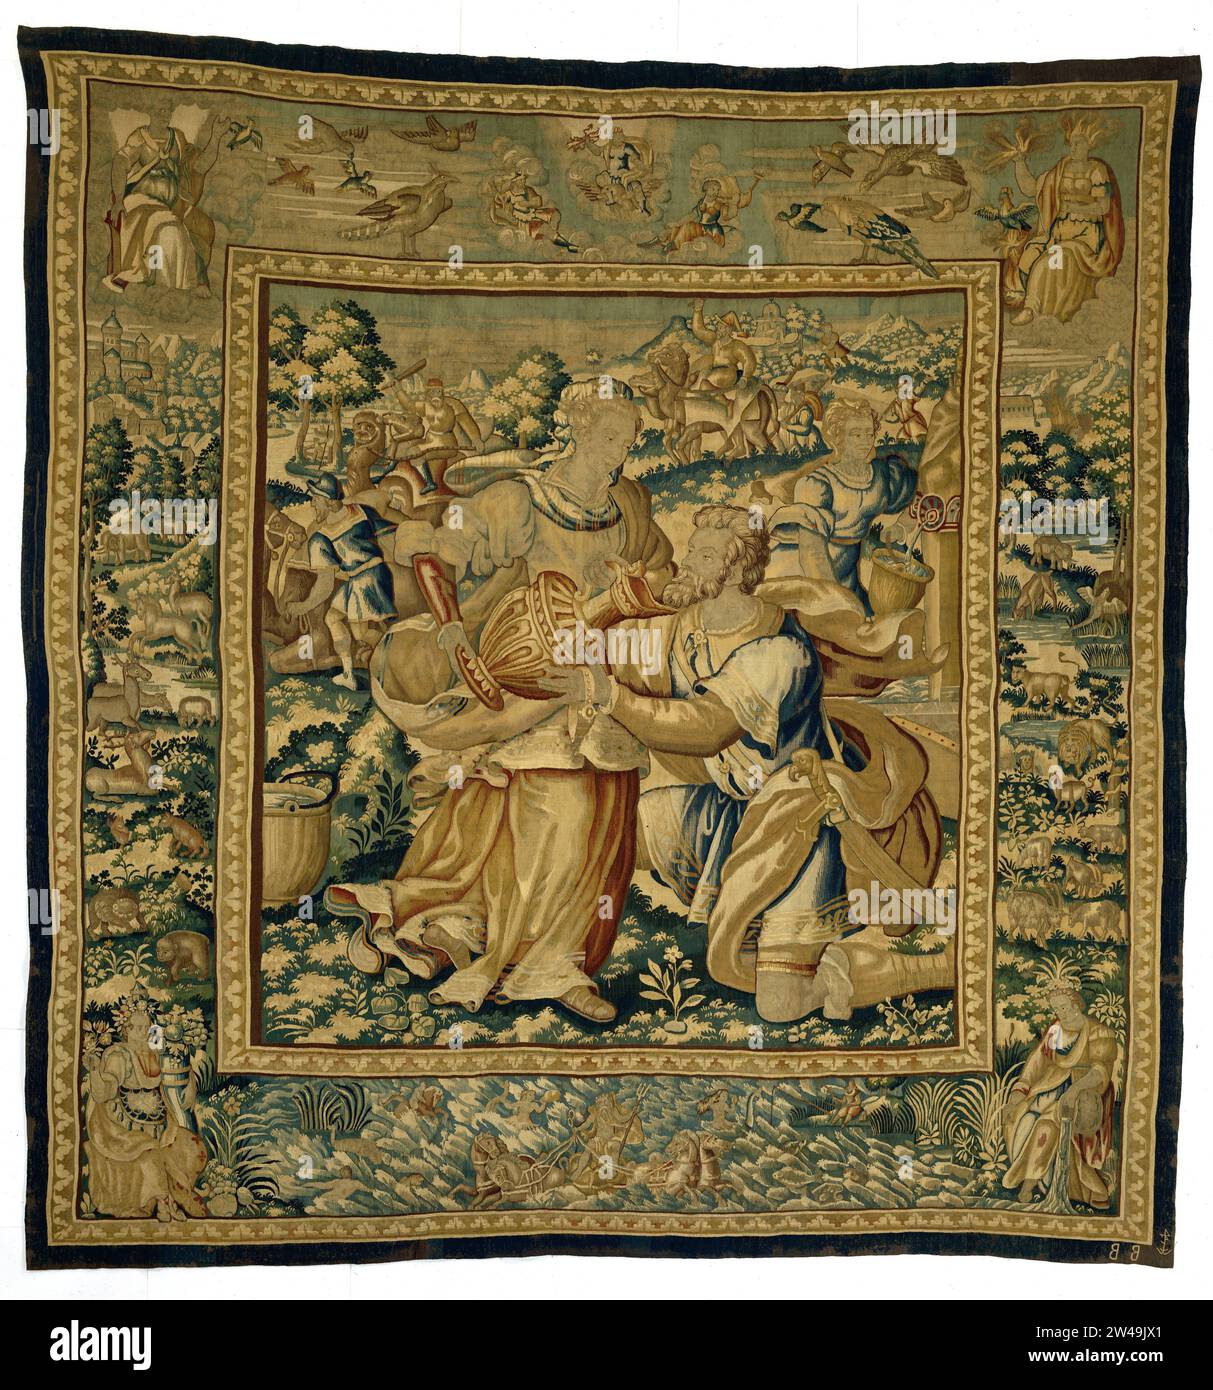 Rebekka and Eliezer at the source, Anonymous, c. 1575 - c. 1600 Wall carpet with Rebecca that gives Eliezer to drink (Gen. 24:18), from a series of tapestries with the history of Rebecca and Eliezer (Gen.24) with edges with animals and the four elements in the corners; With the weaver brand of Willem de Kempenere. Brussels Ketting: Wool. Entry: Wool. Entry: Silk tapestry Wall carpet with Rebecca that gives Eliezer to drink (Gen. 24:18), from a series of tapestries with the history of Rebecca and Eliezer (Gen.24) with edges with animals and the four elements in the corners; With the weaver bran Stock Photo